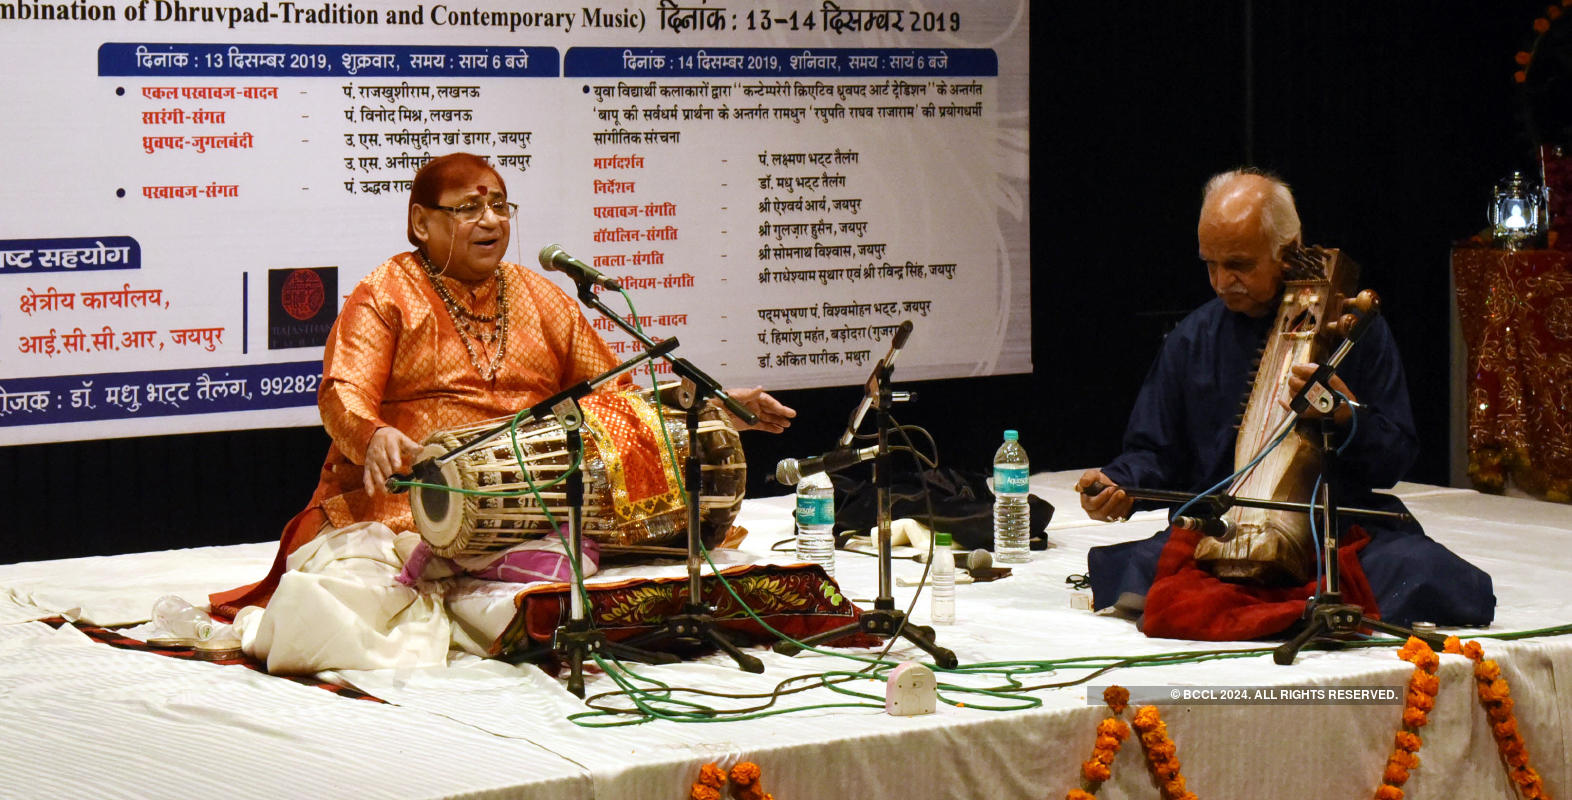 A soulful rendition of Dhruvpad at JKK